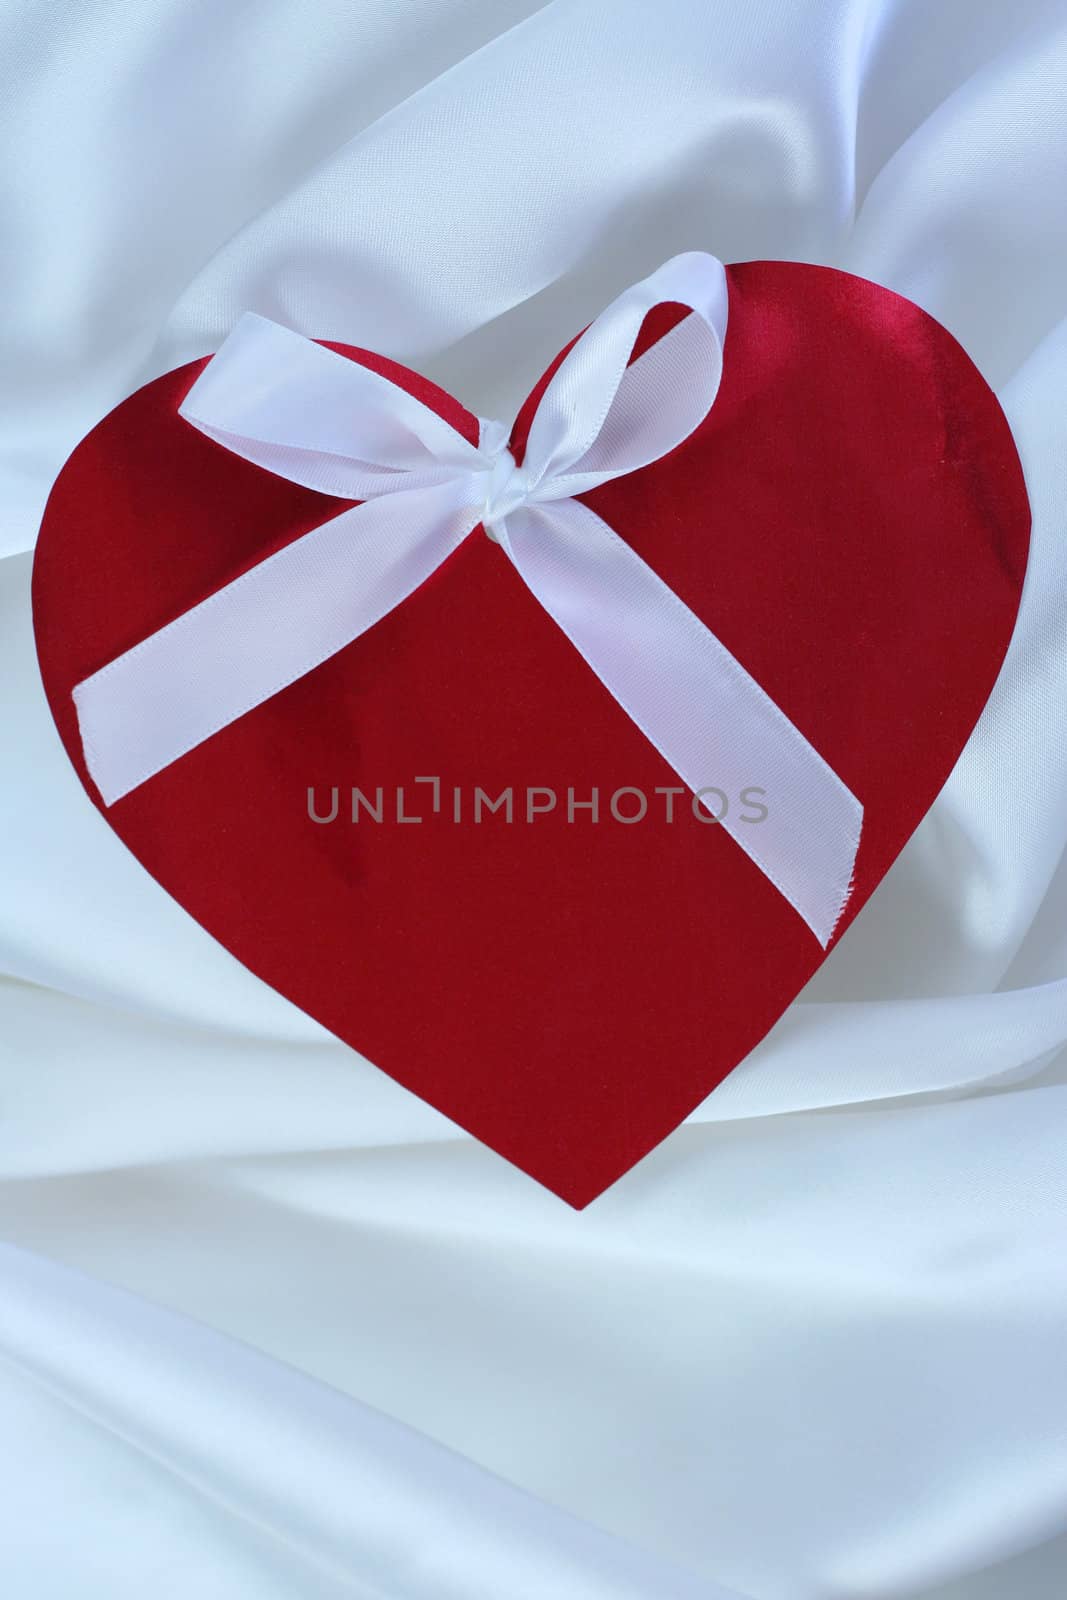 Red heart with ribbon on white satin